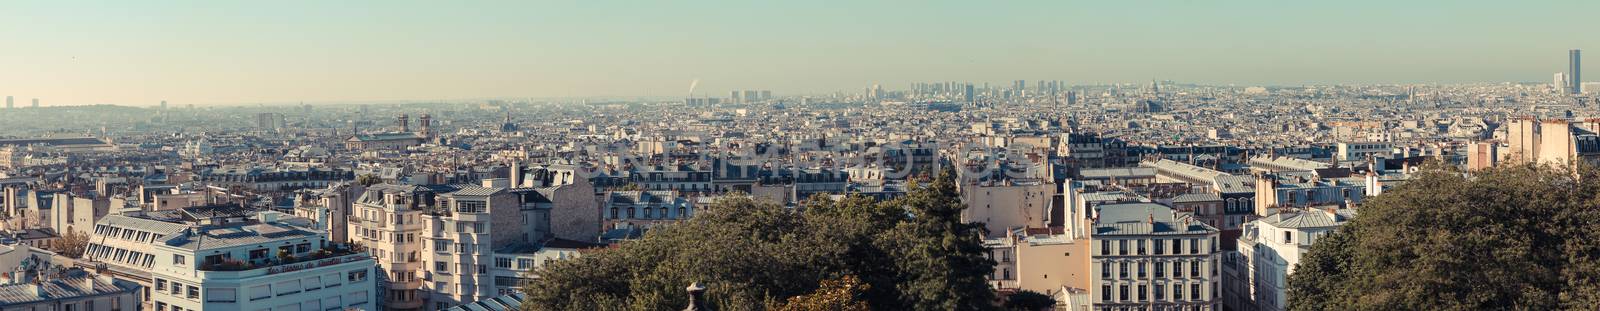 View of Paris from above by sarymsakov